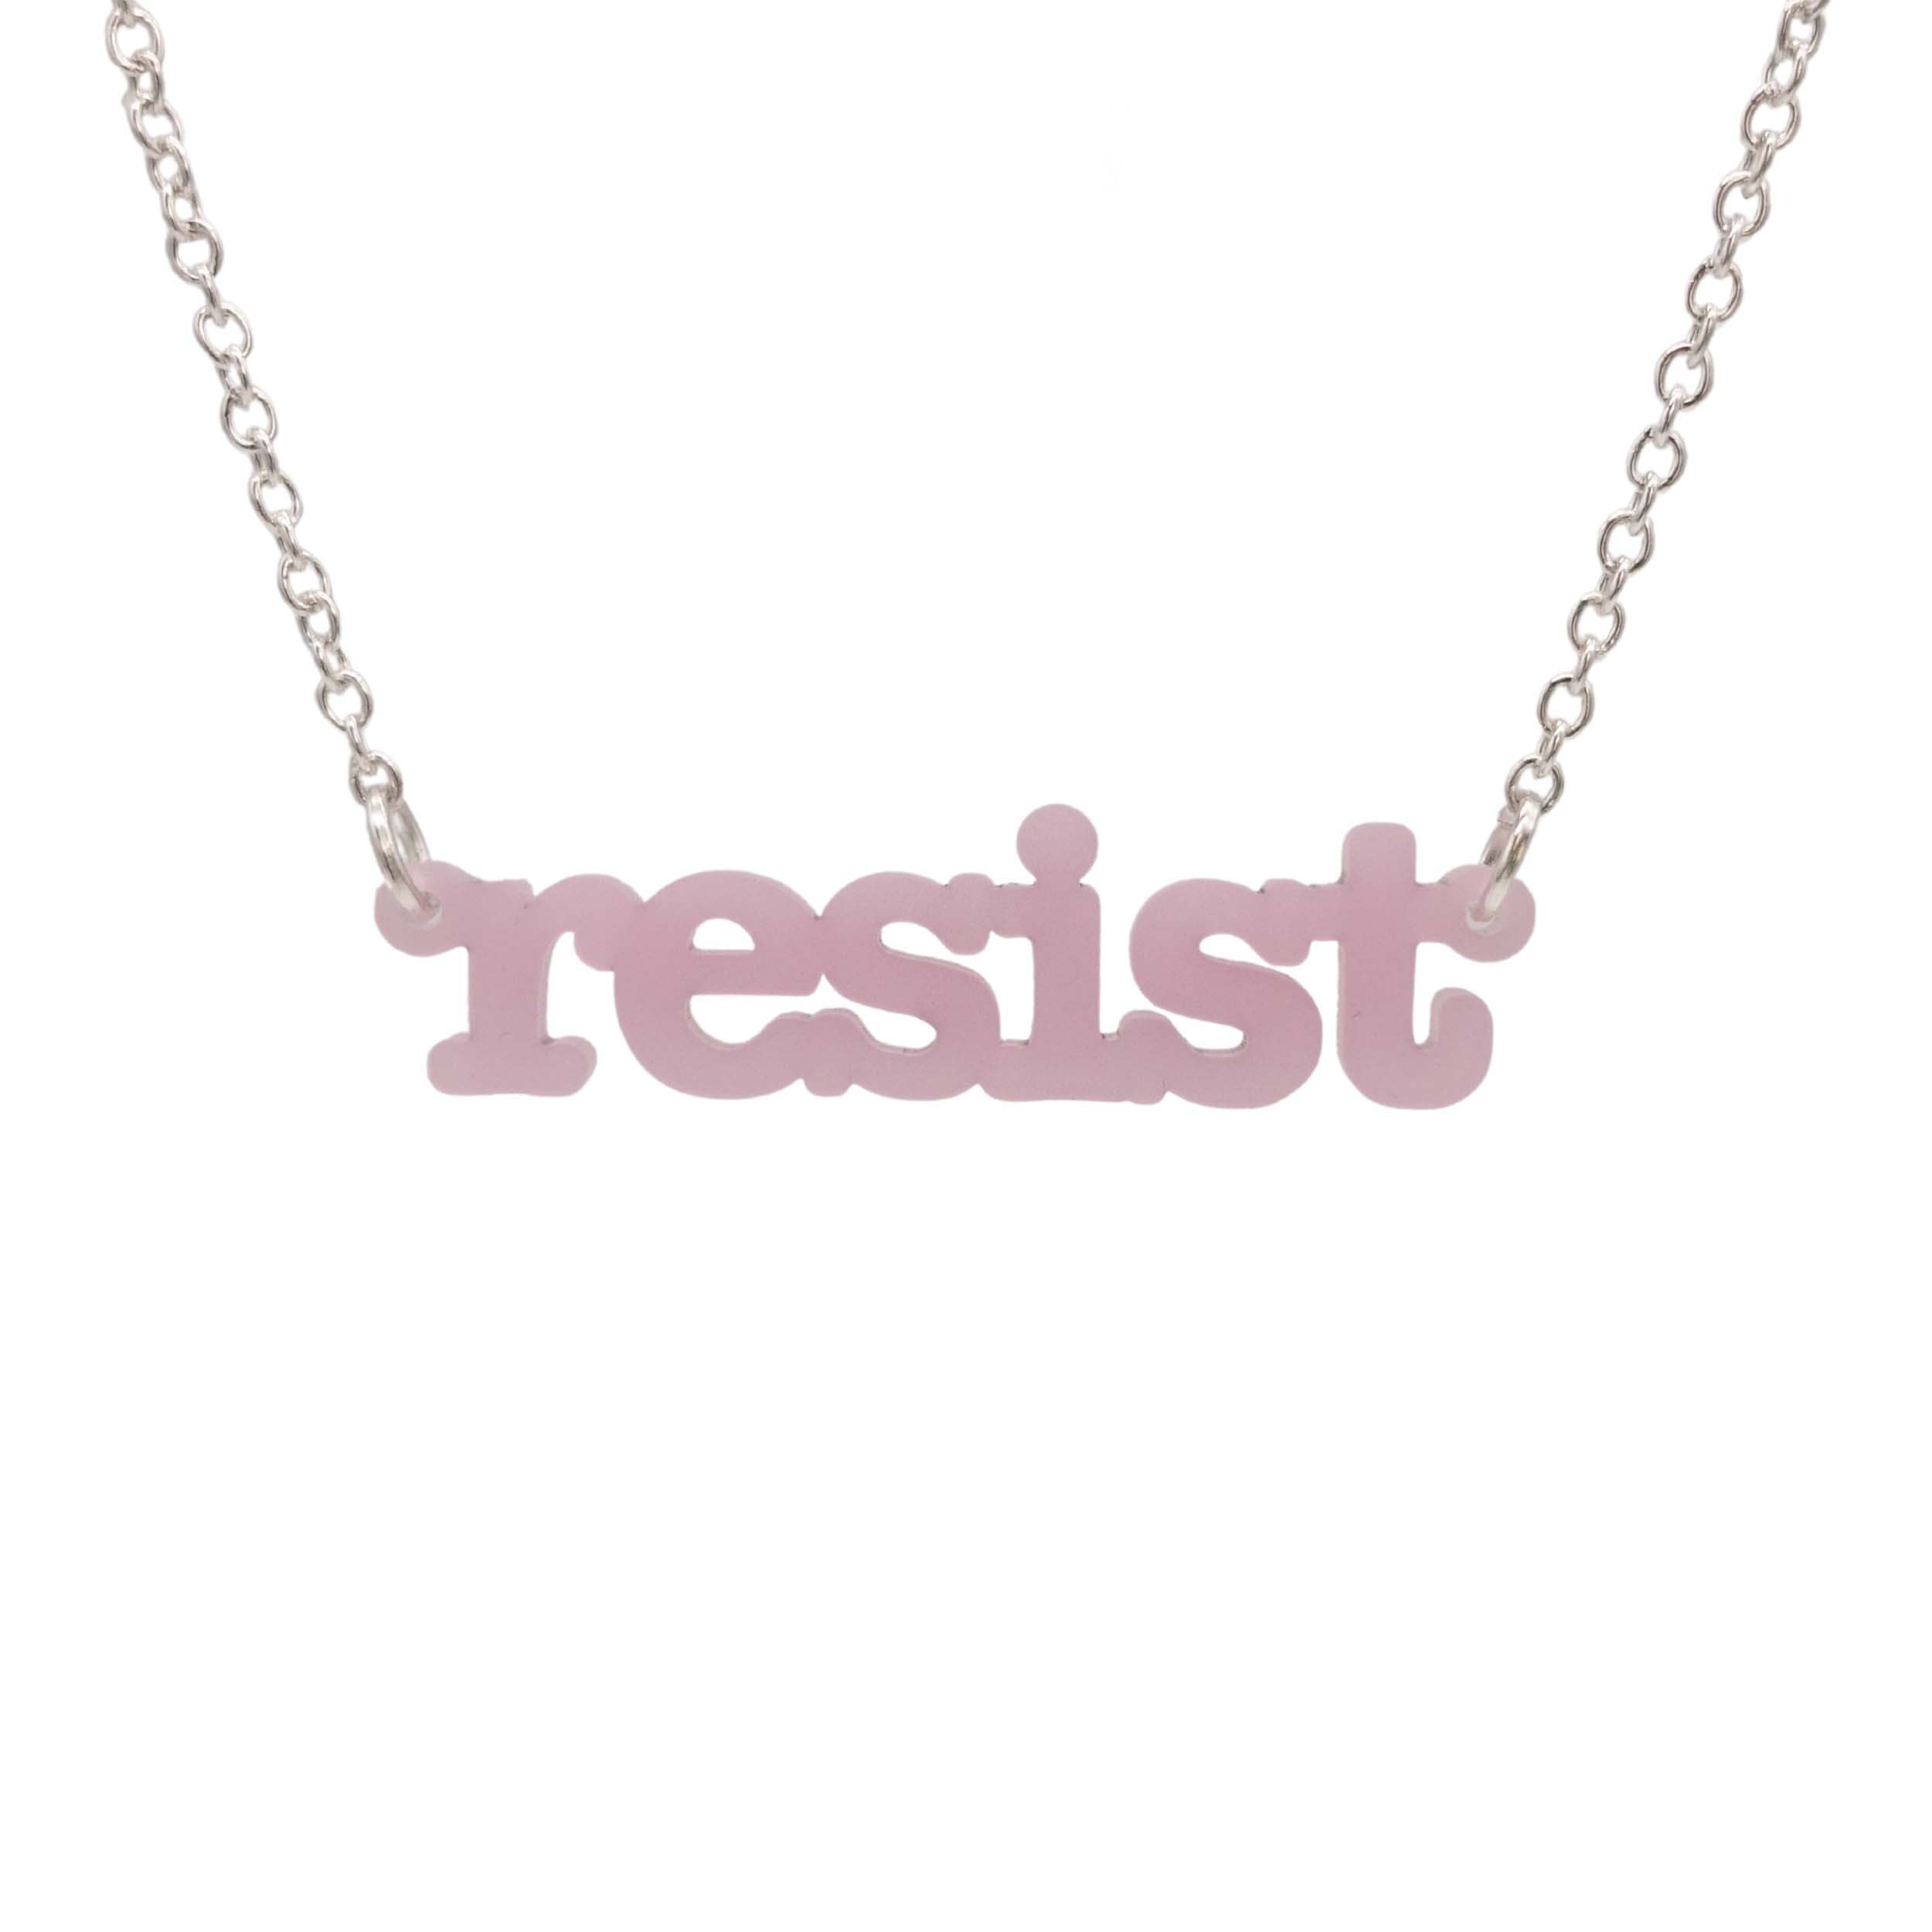 Shell pink Resist necklace in typewriter font hanging on a silver chain against a white background. 